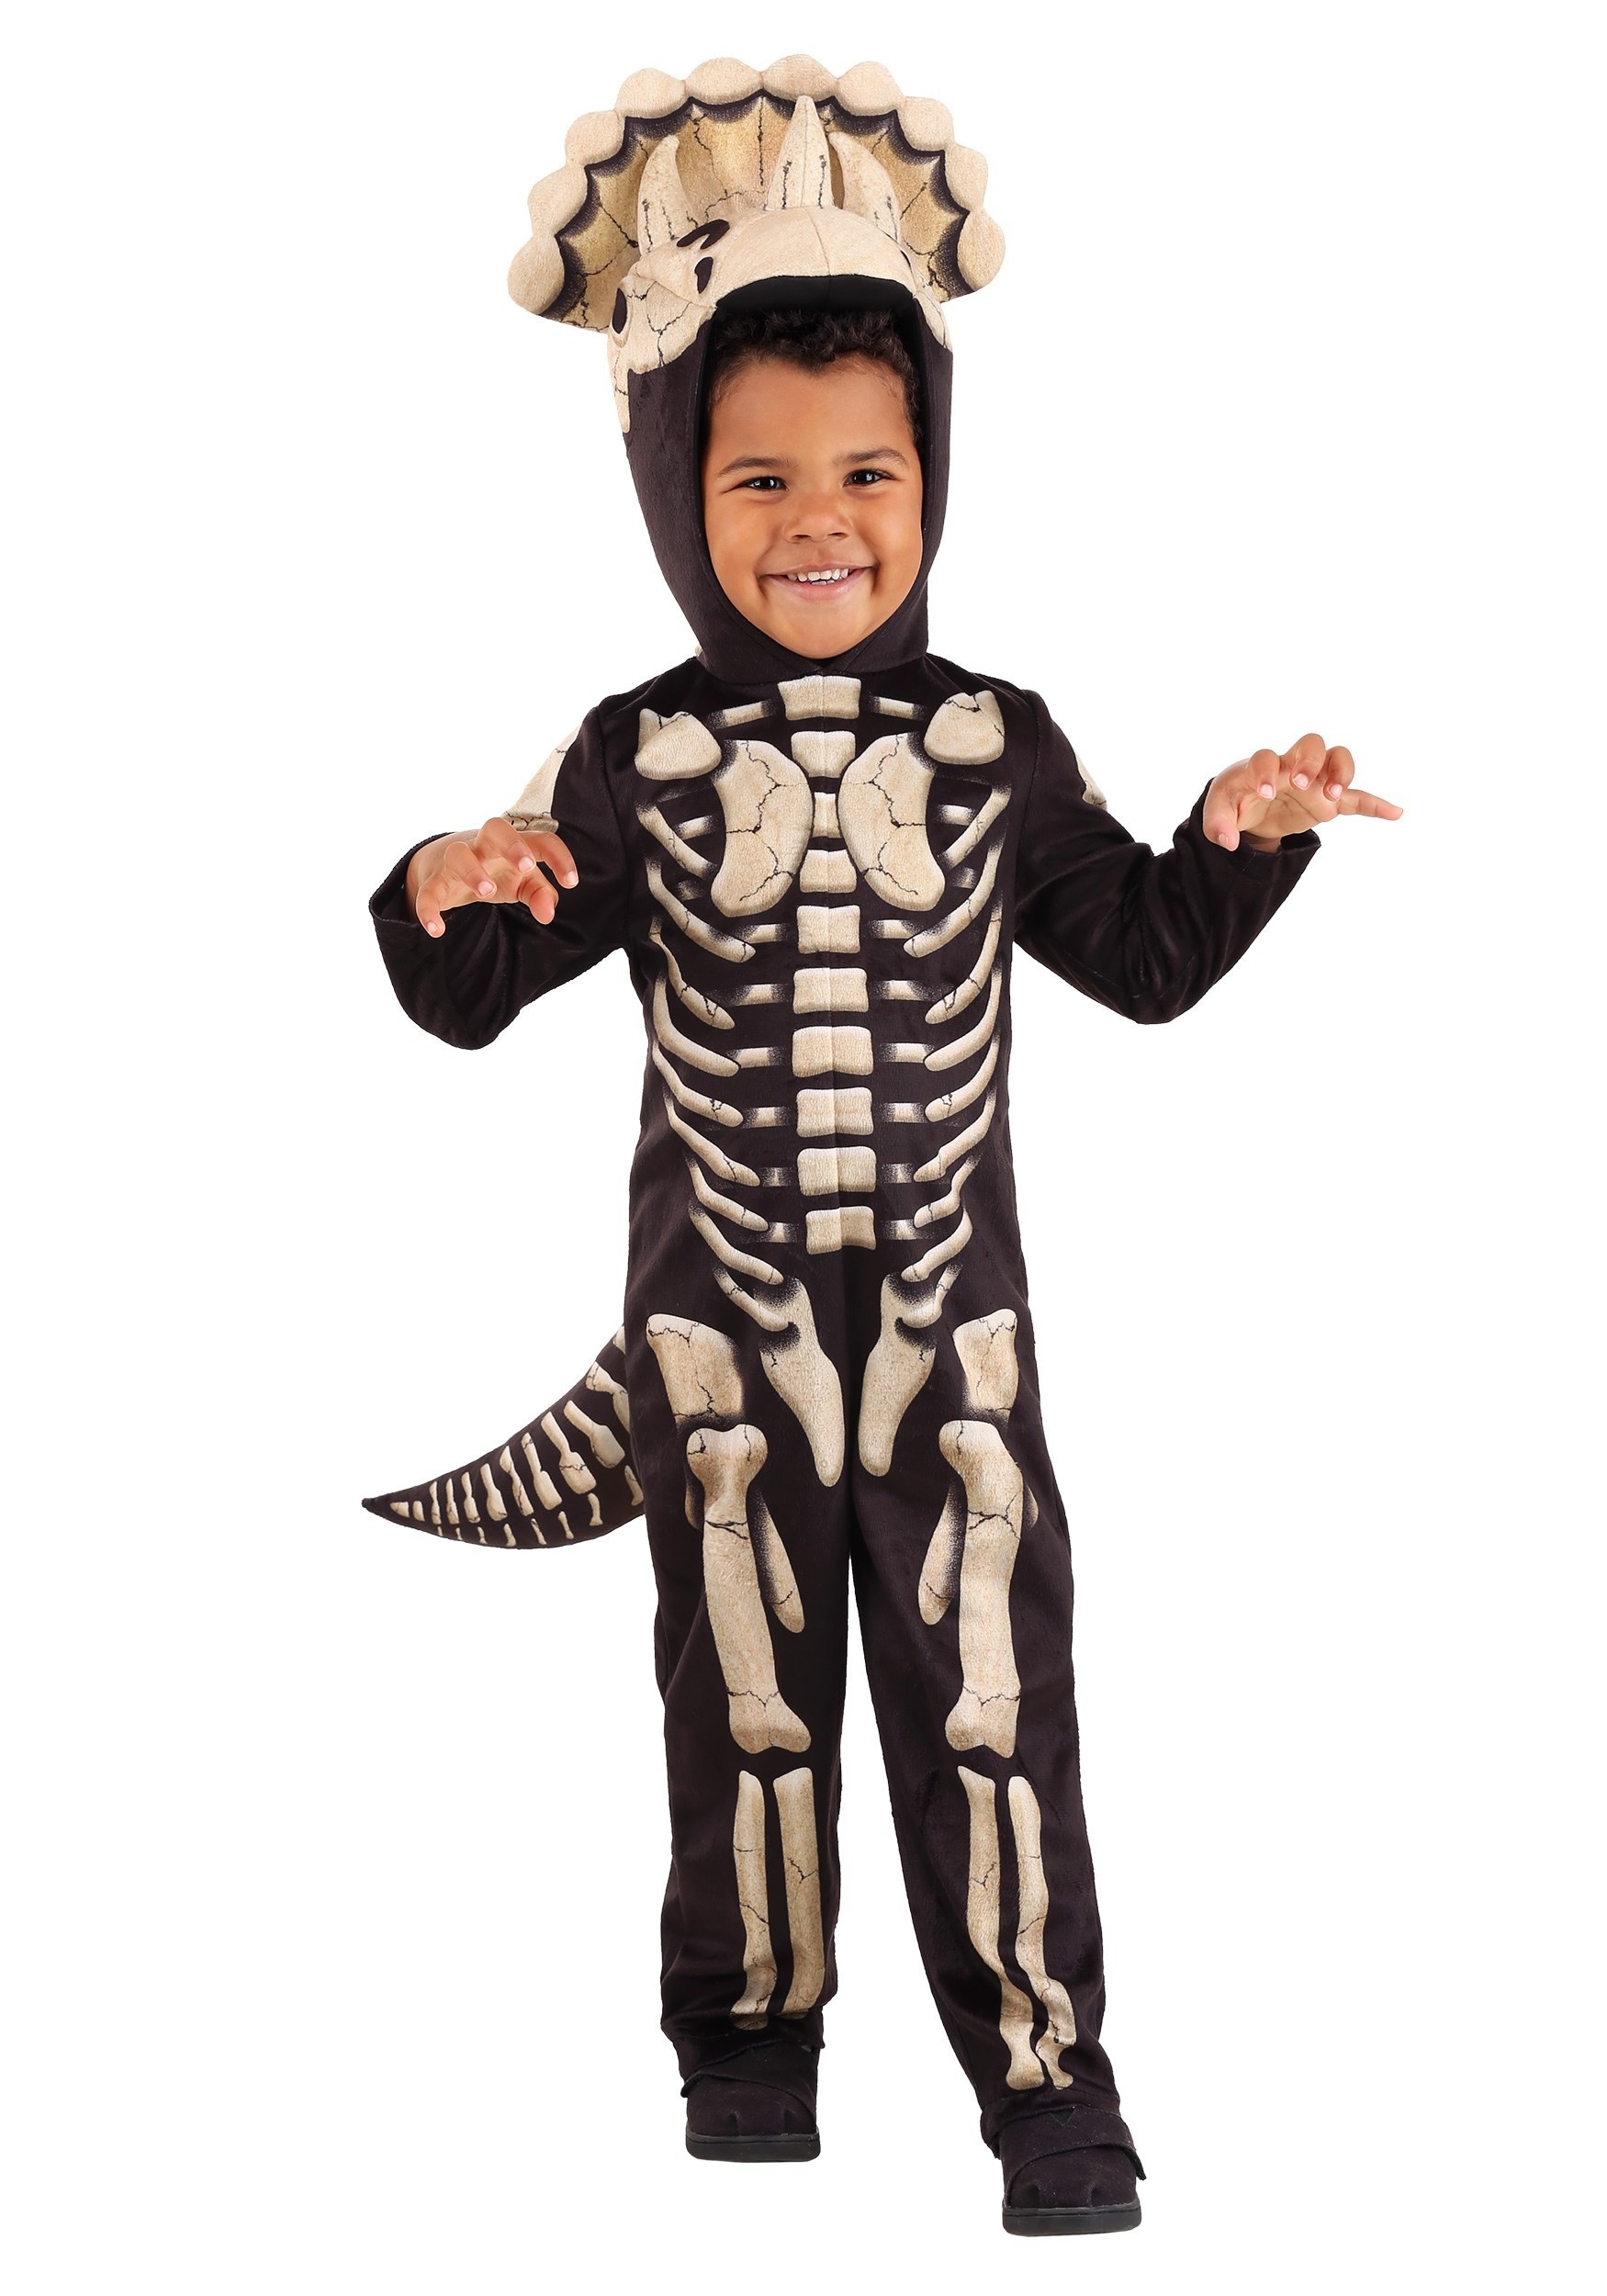 Photos - Fancy Dress FOSSIL FUN Costumes Triceratops  Costume for Toddlers Black/Brown FUN12 